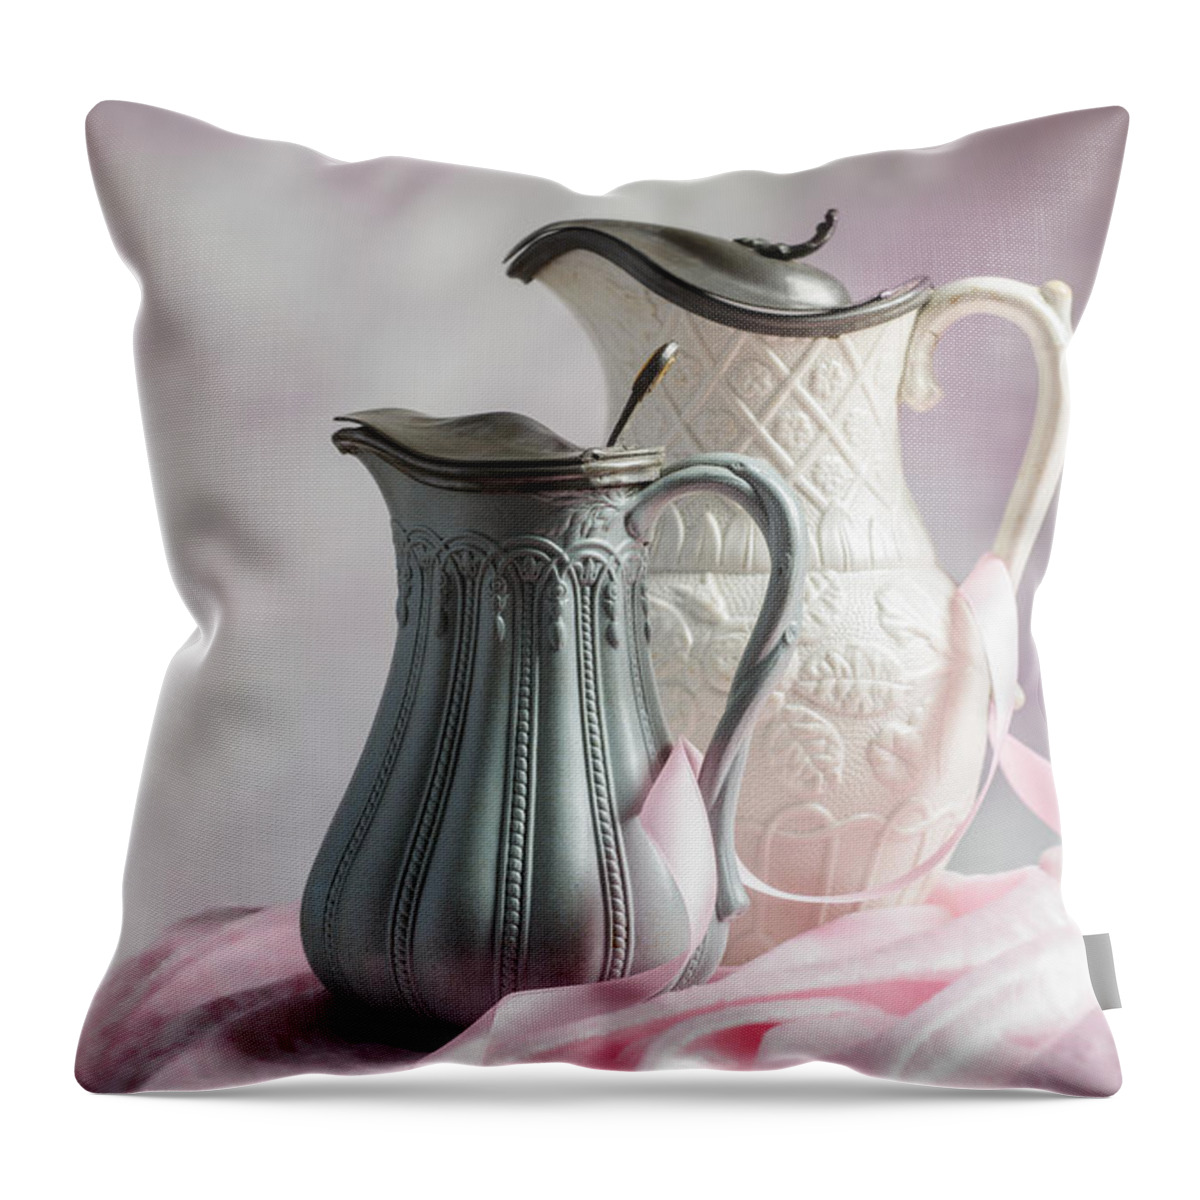 Antique Throw Pillow featuring the photograph Antique Jugs by Amanda Elwell